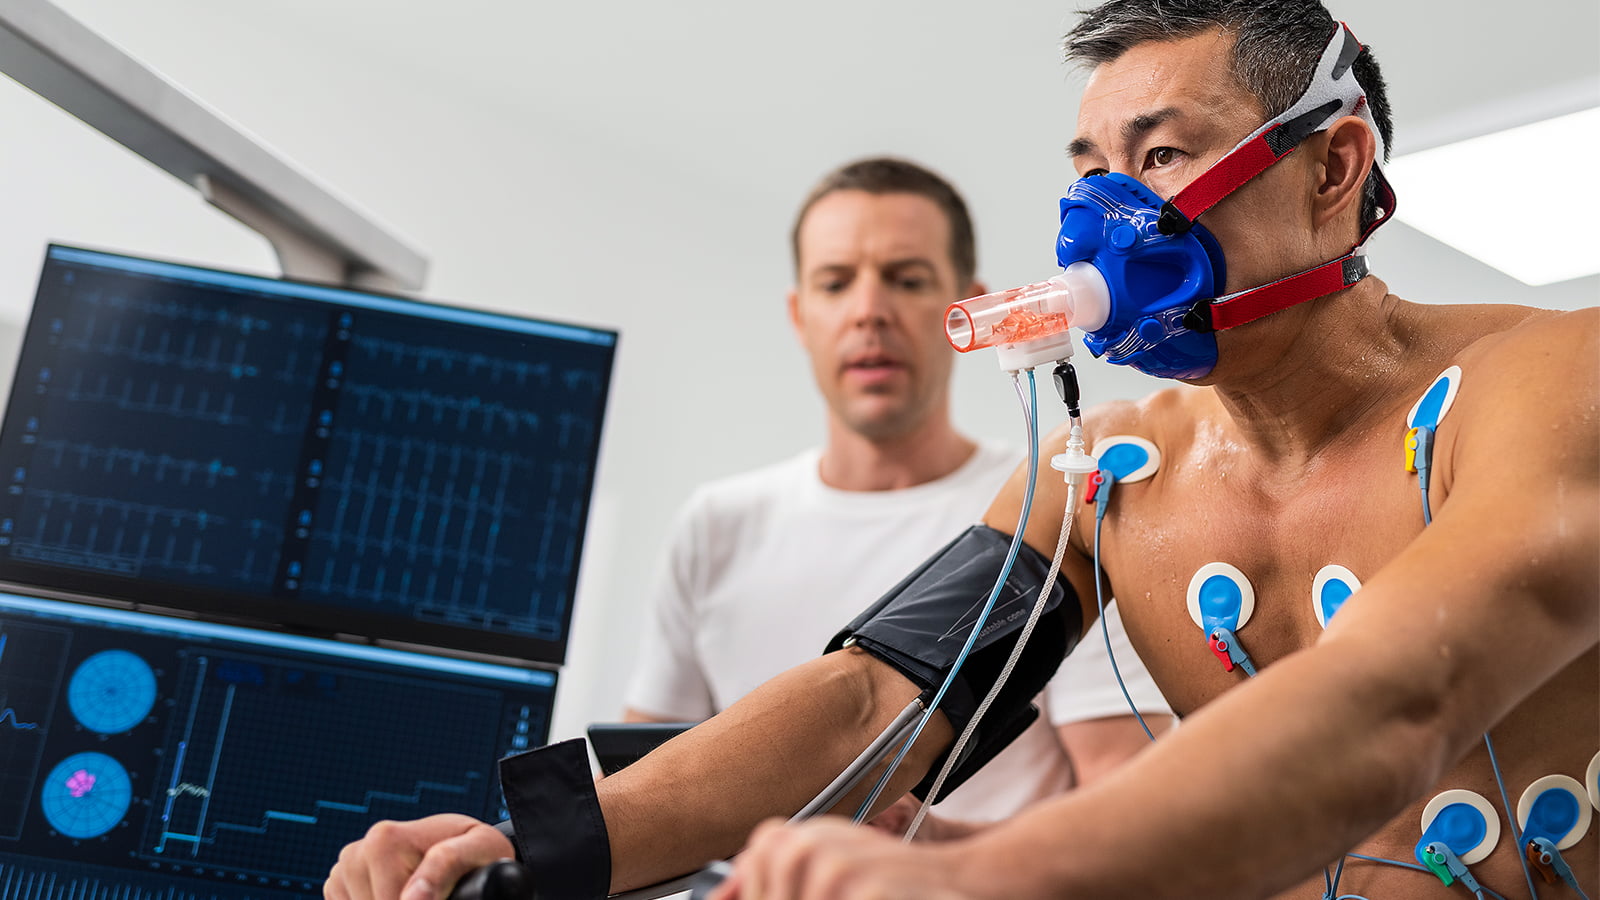 A study by U of A nursing students suggests measuring peak oxygen uptake in childhood cancer survivors could help identify who is at risk of future cardiovascular problems and get them into exercise rehabilitation programs. (Photo: Getty Images)